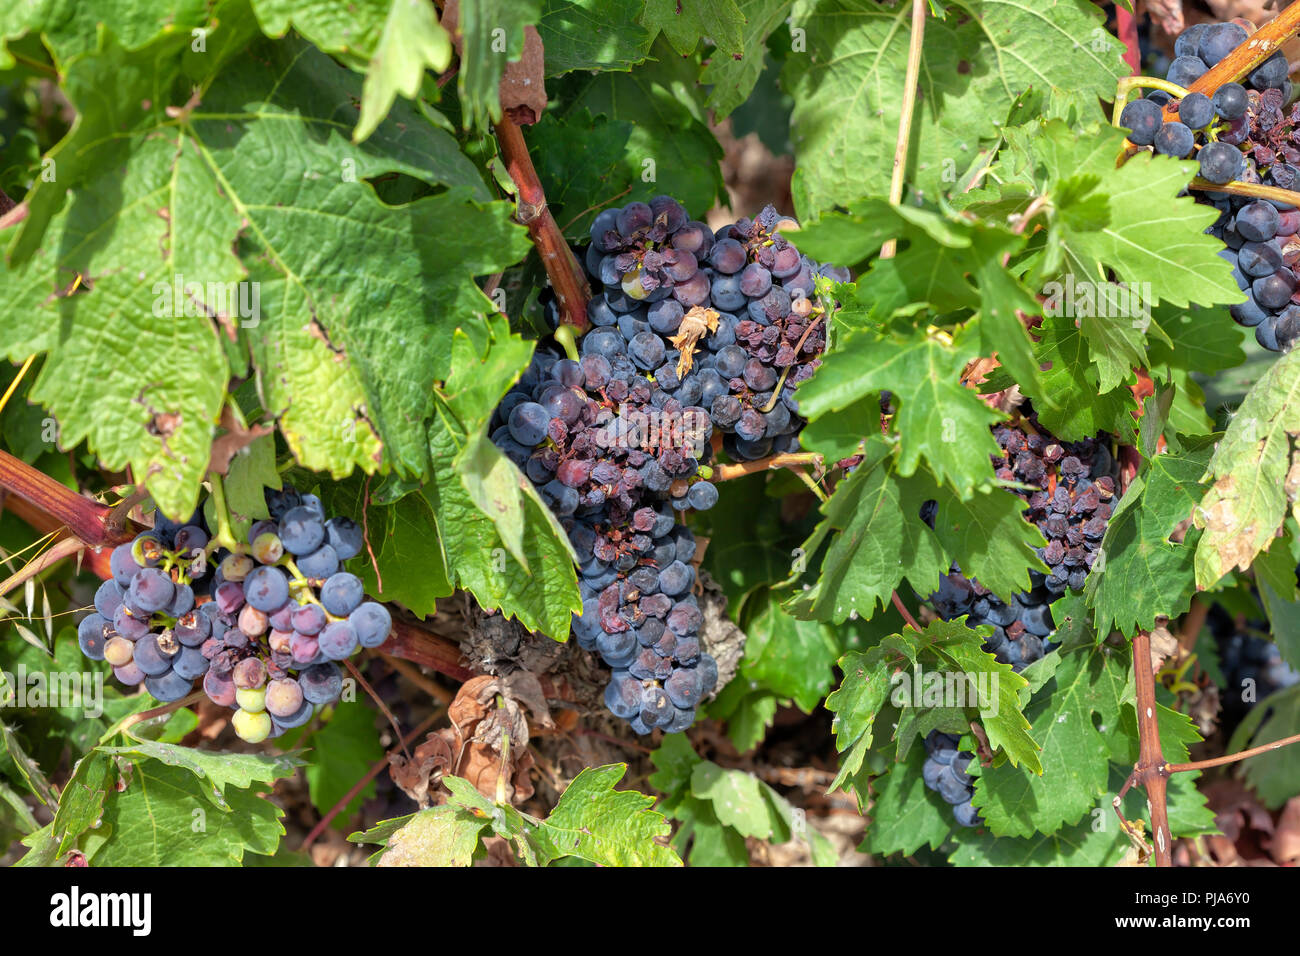 Detail of a growing grapes in trouble. Stock Photo